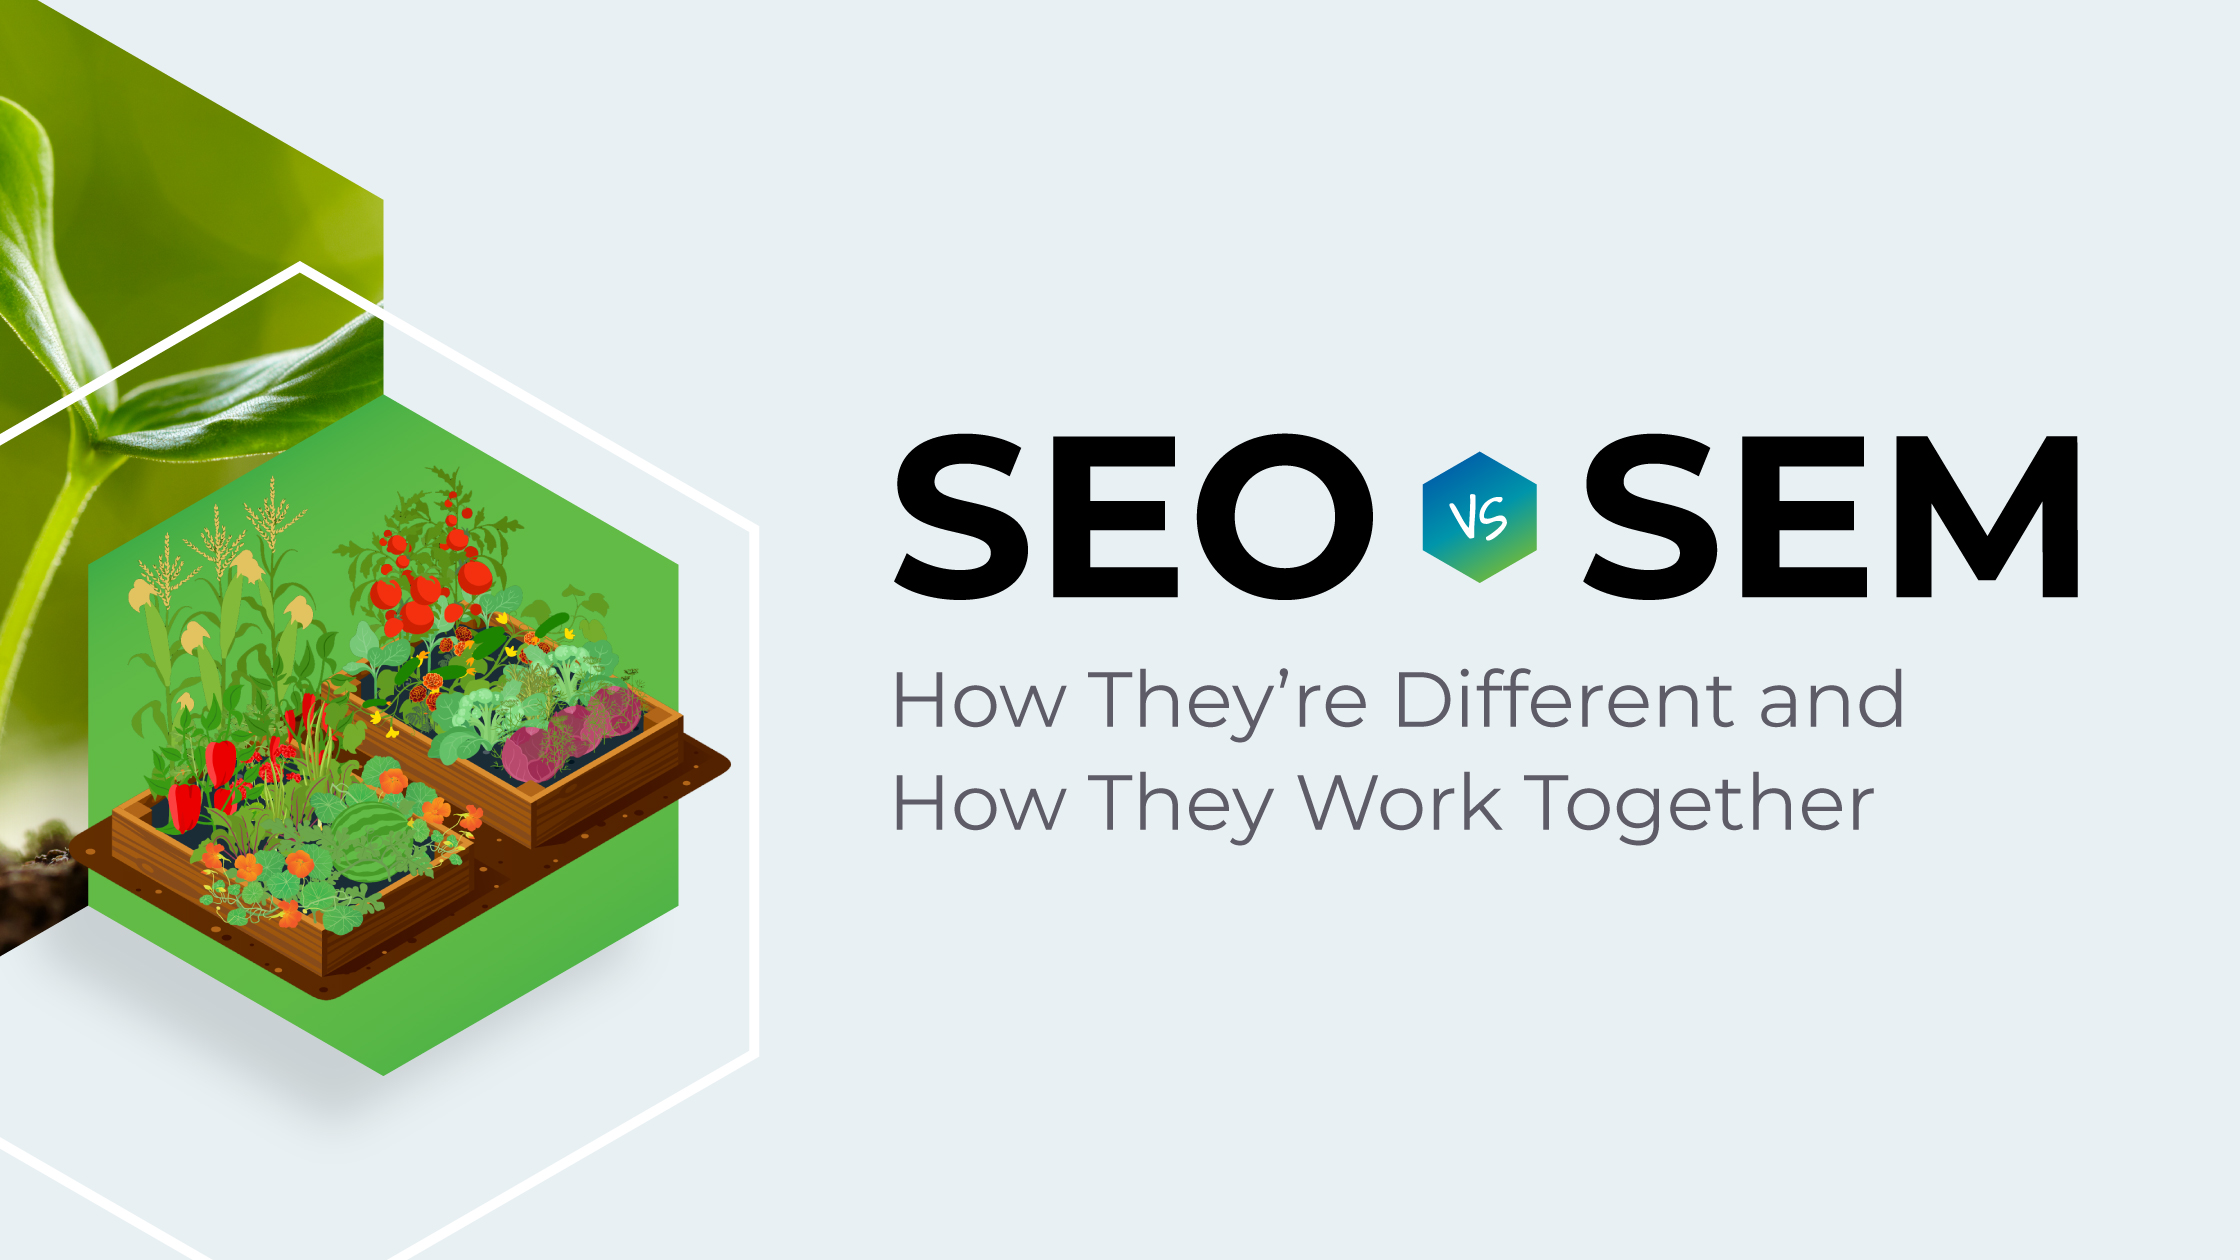 SEO vs SEM: How They’re Different & How They Work Together